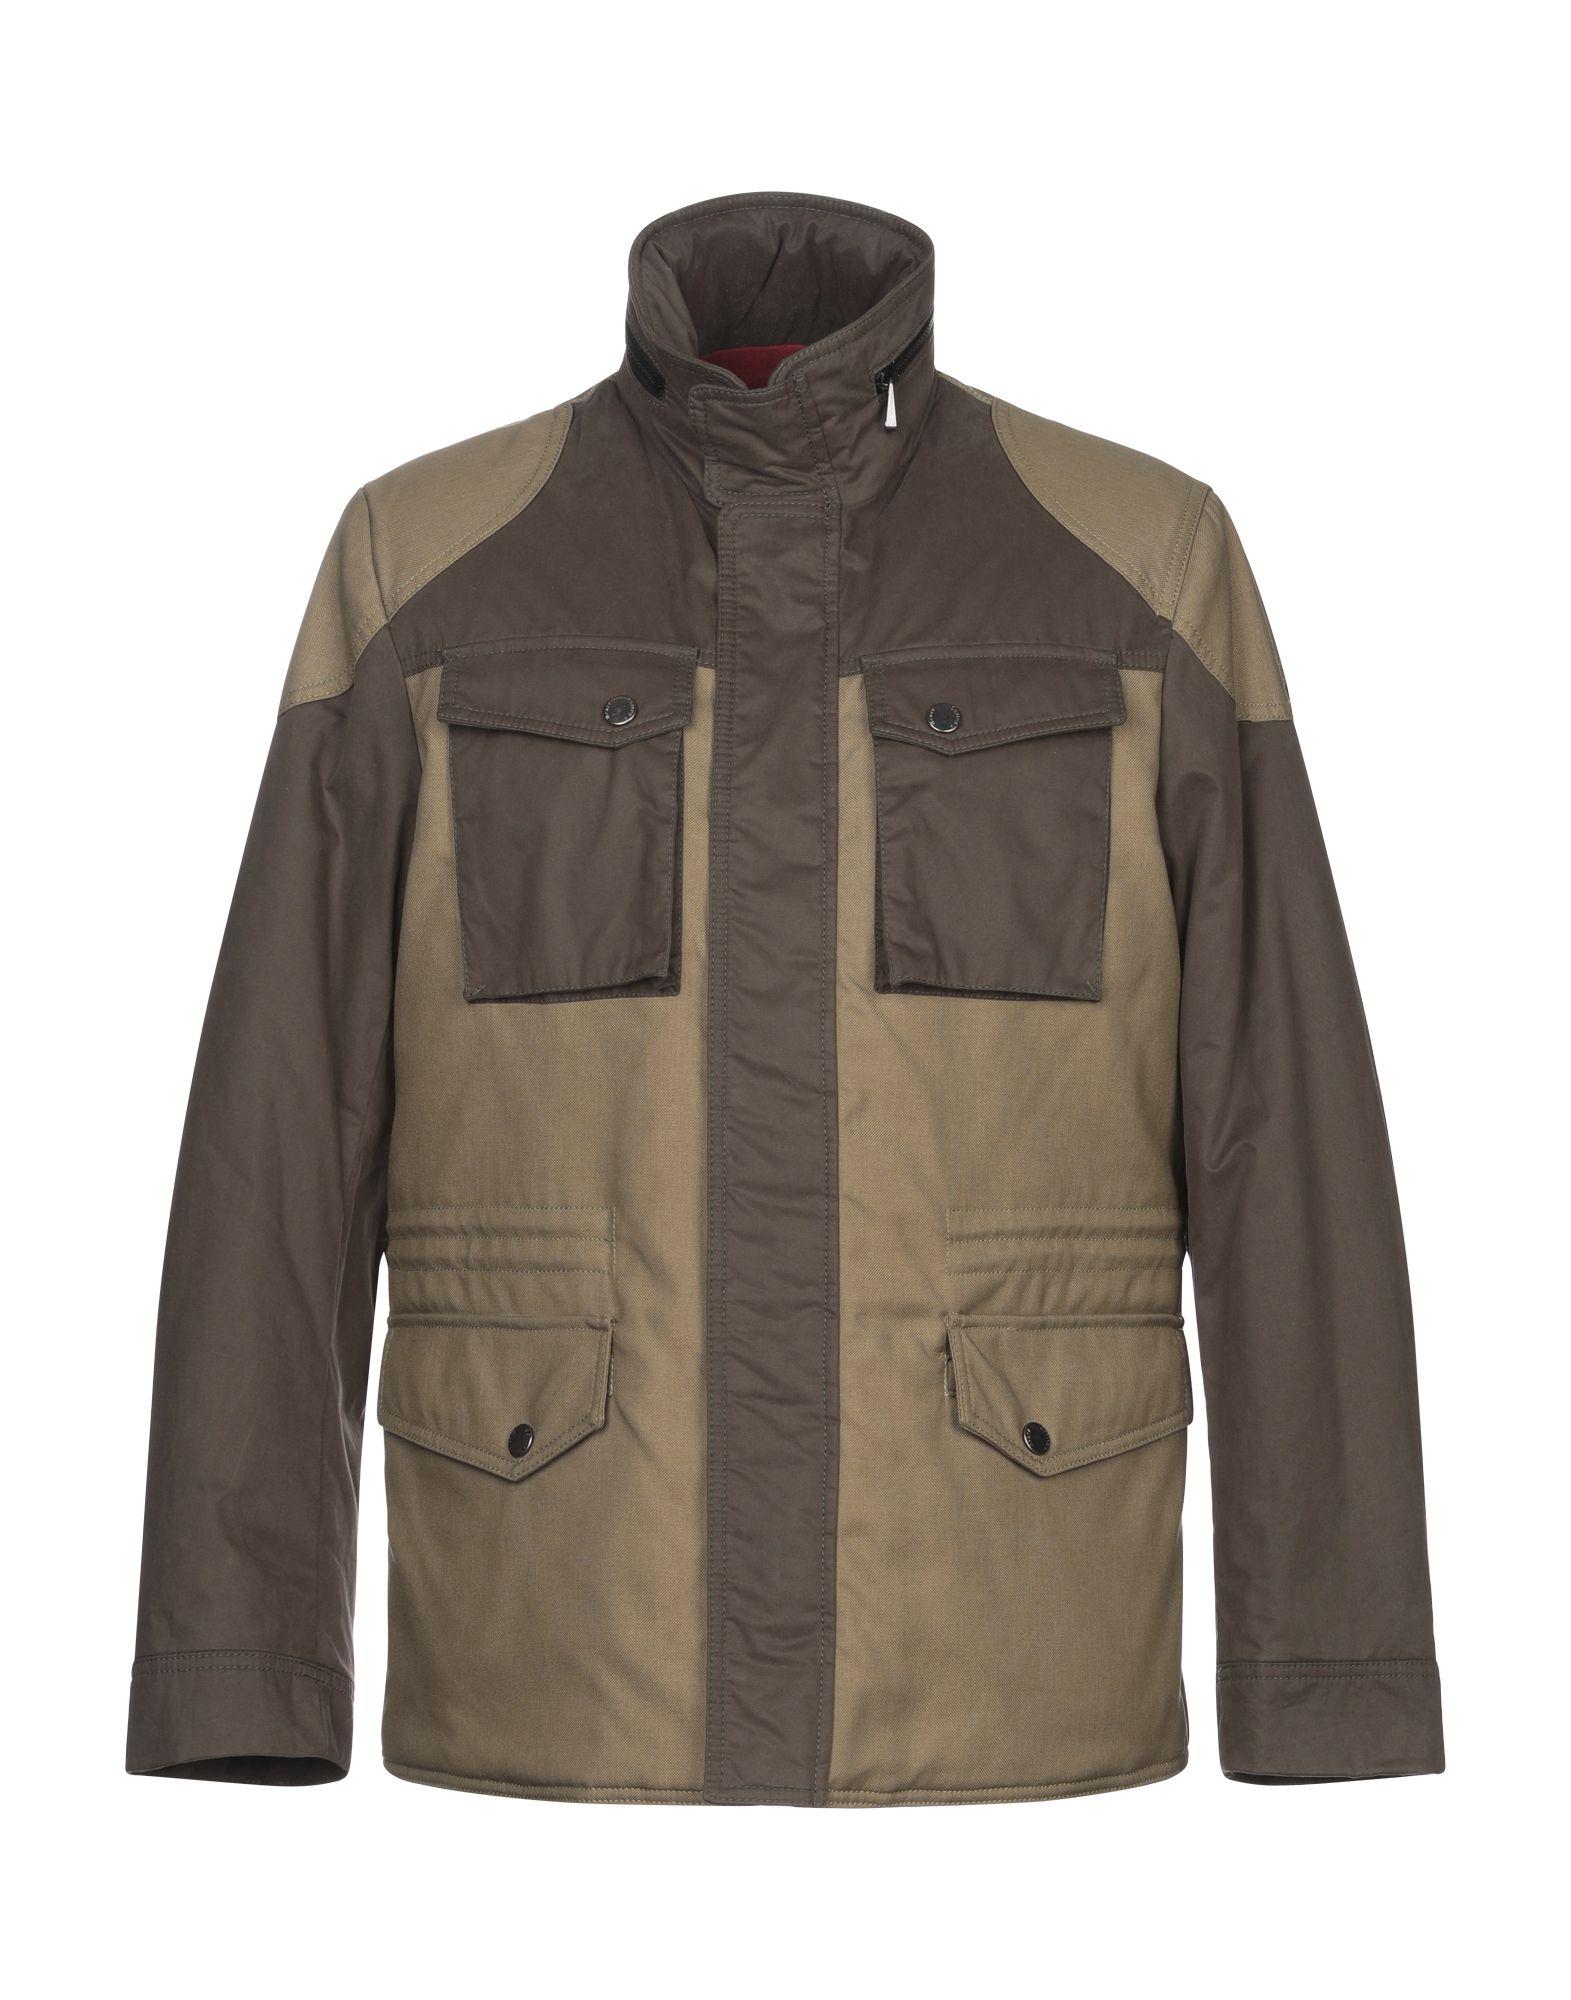 Henry Cotton's Jacket in Military Green (Green) for Men - Lyst